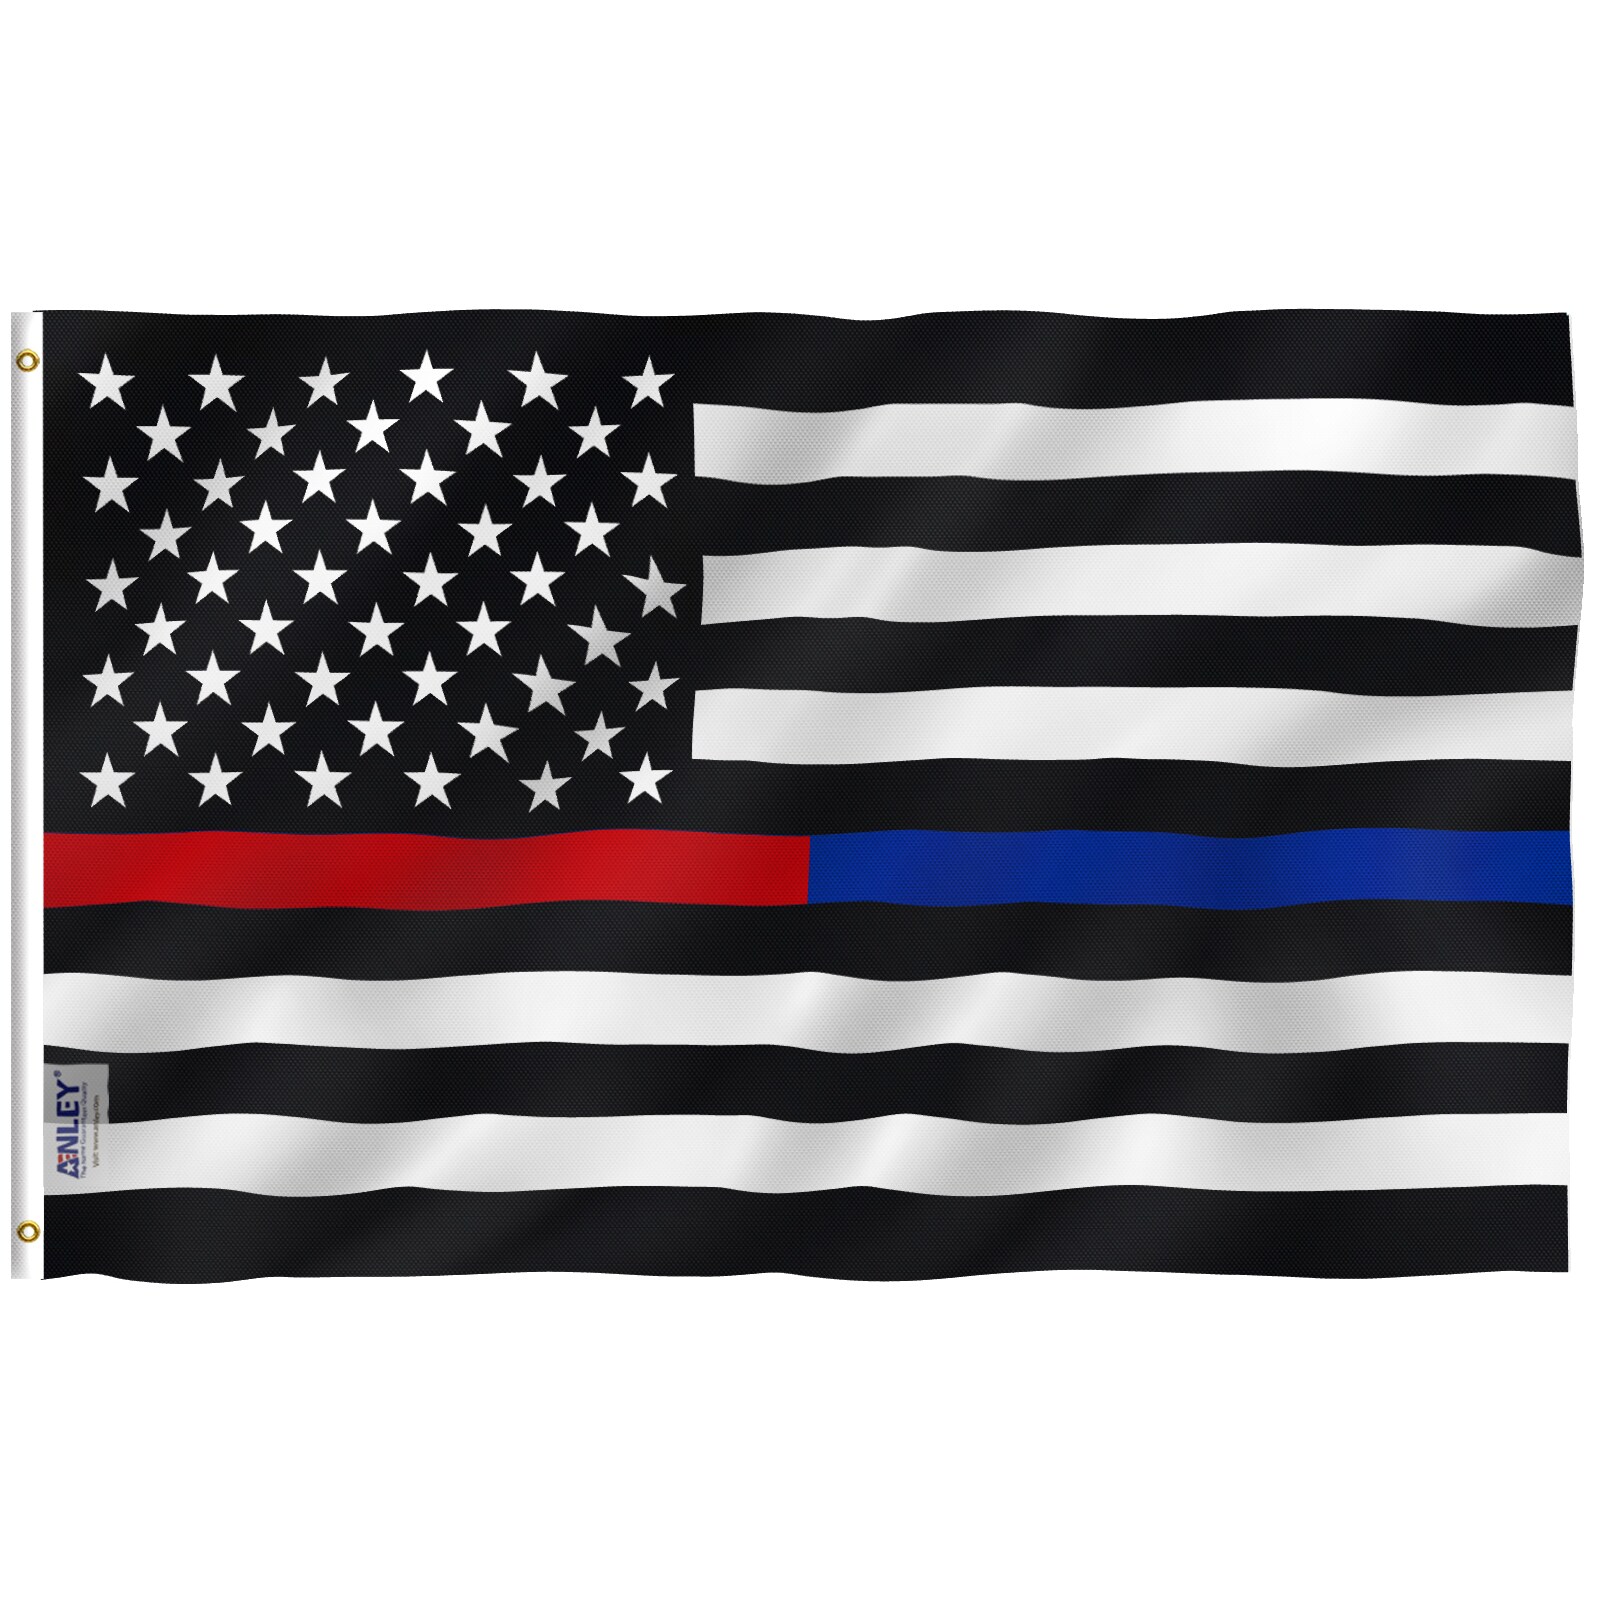 3 x 5 ft with Grommets Thin Blue Line and Thin Red Line Dual American Flag 